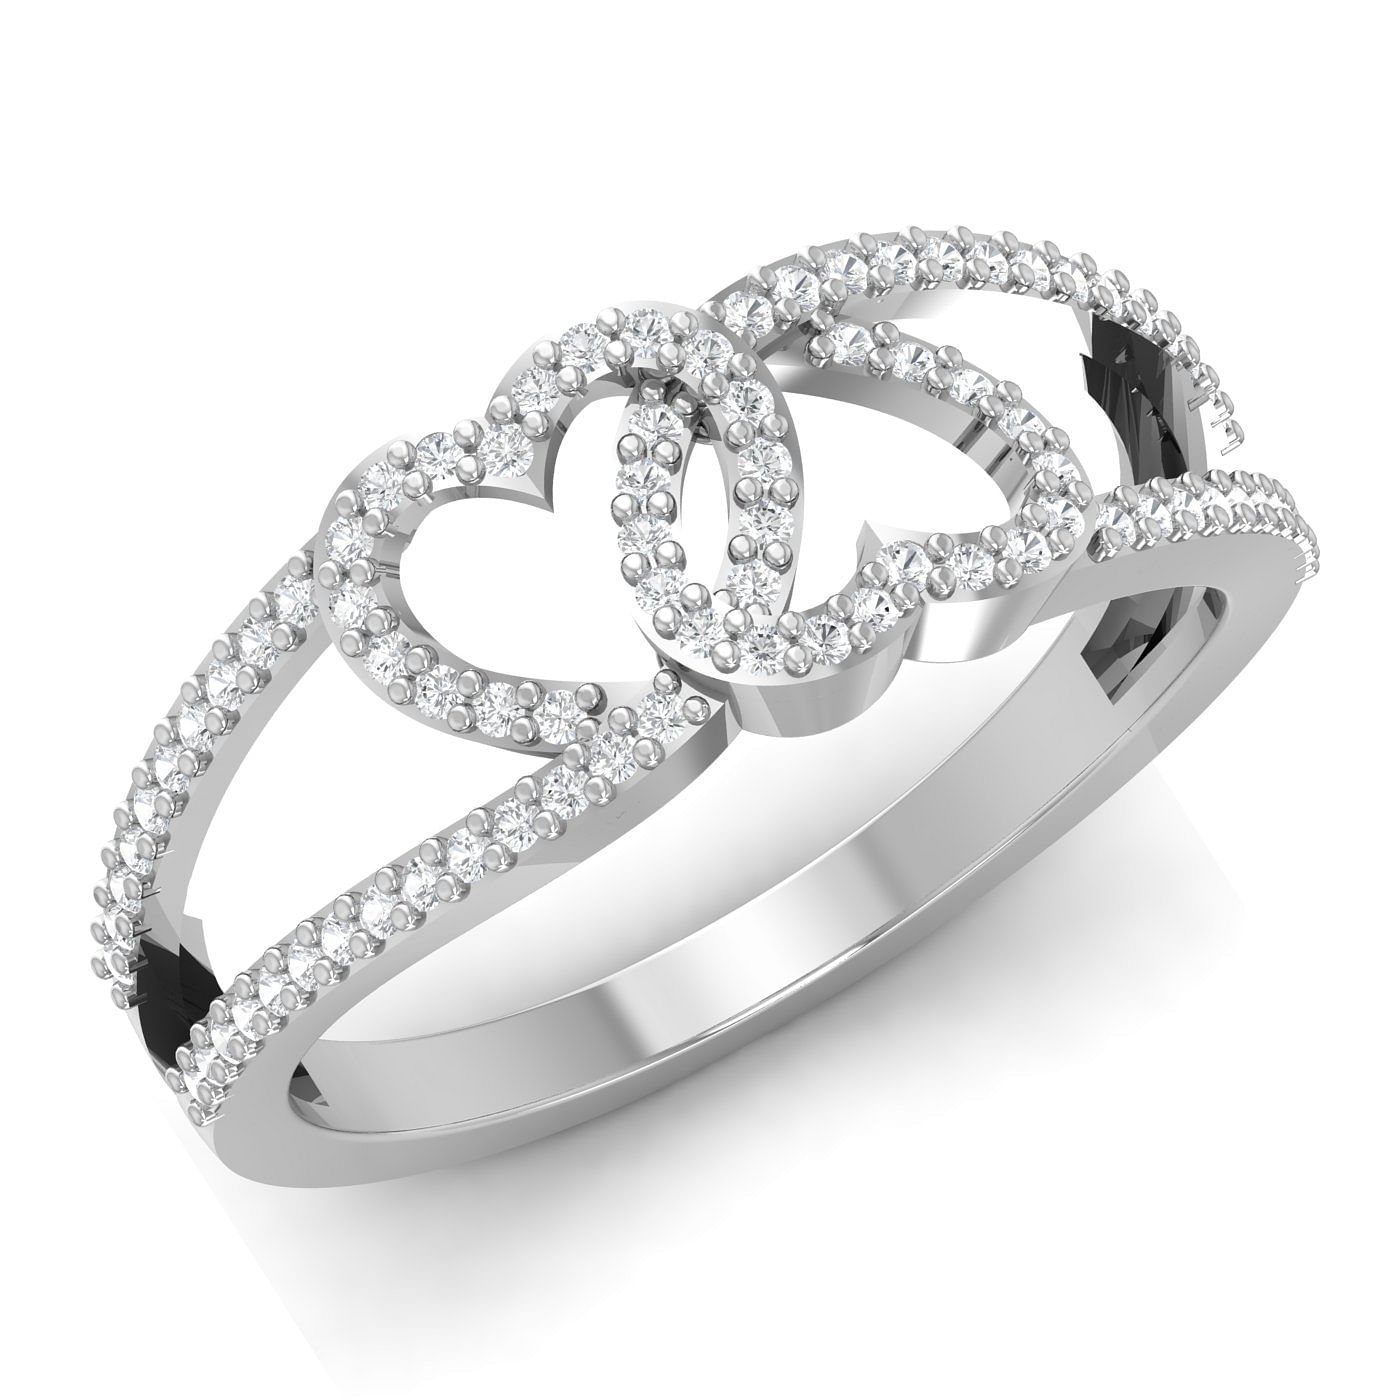 Merge Heart Wedding Ring With White Gold Metal